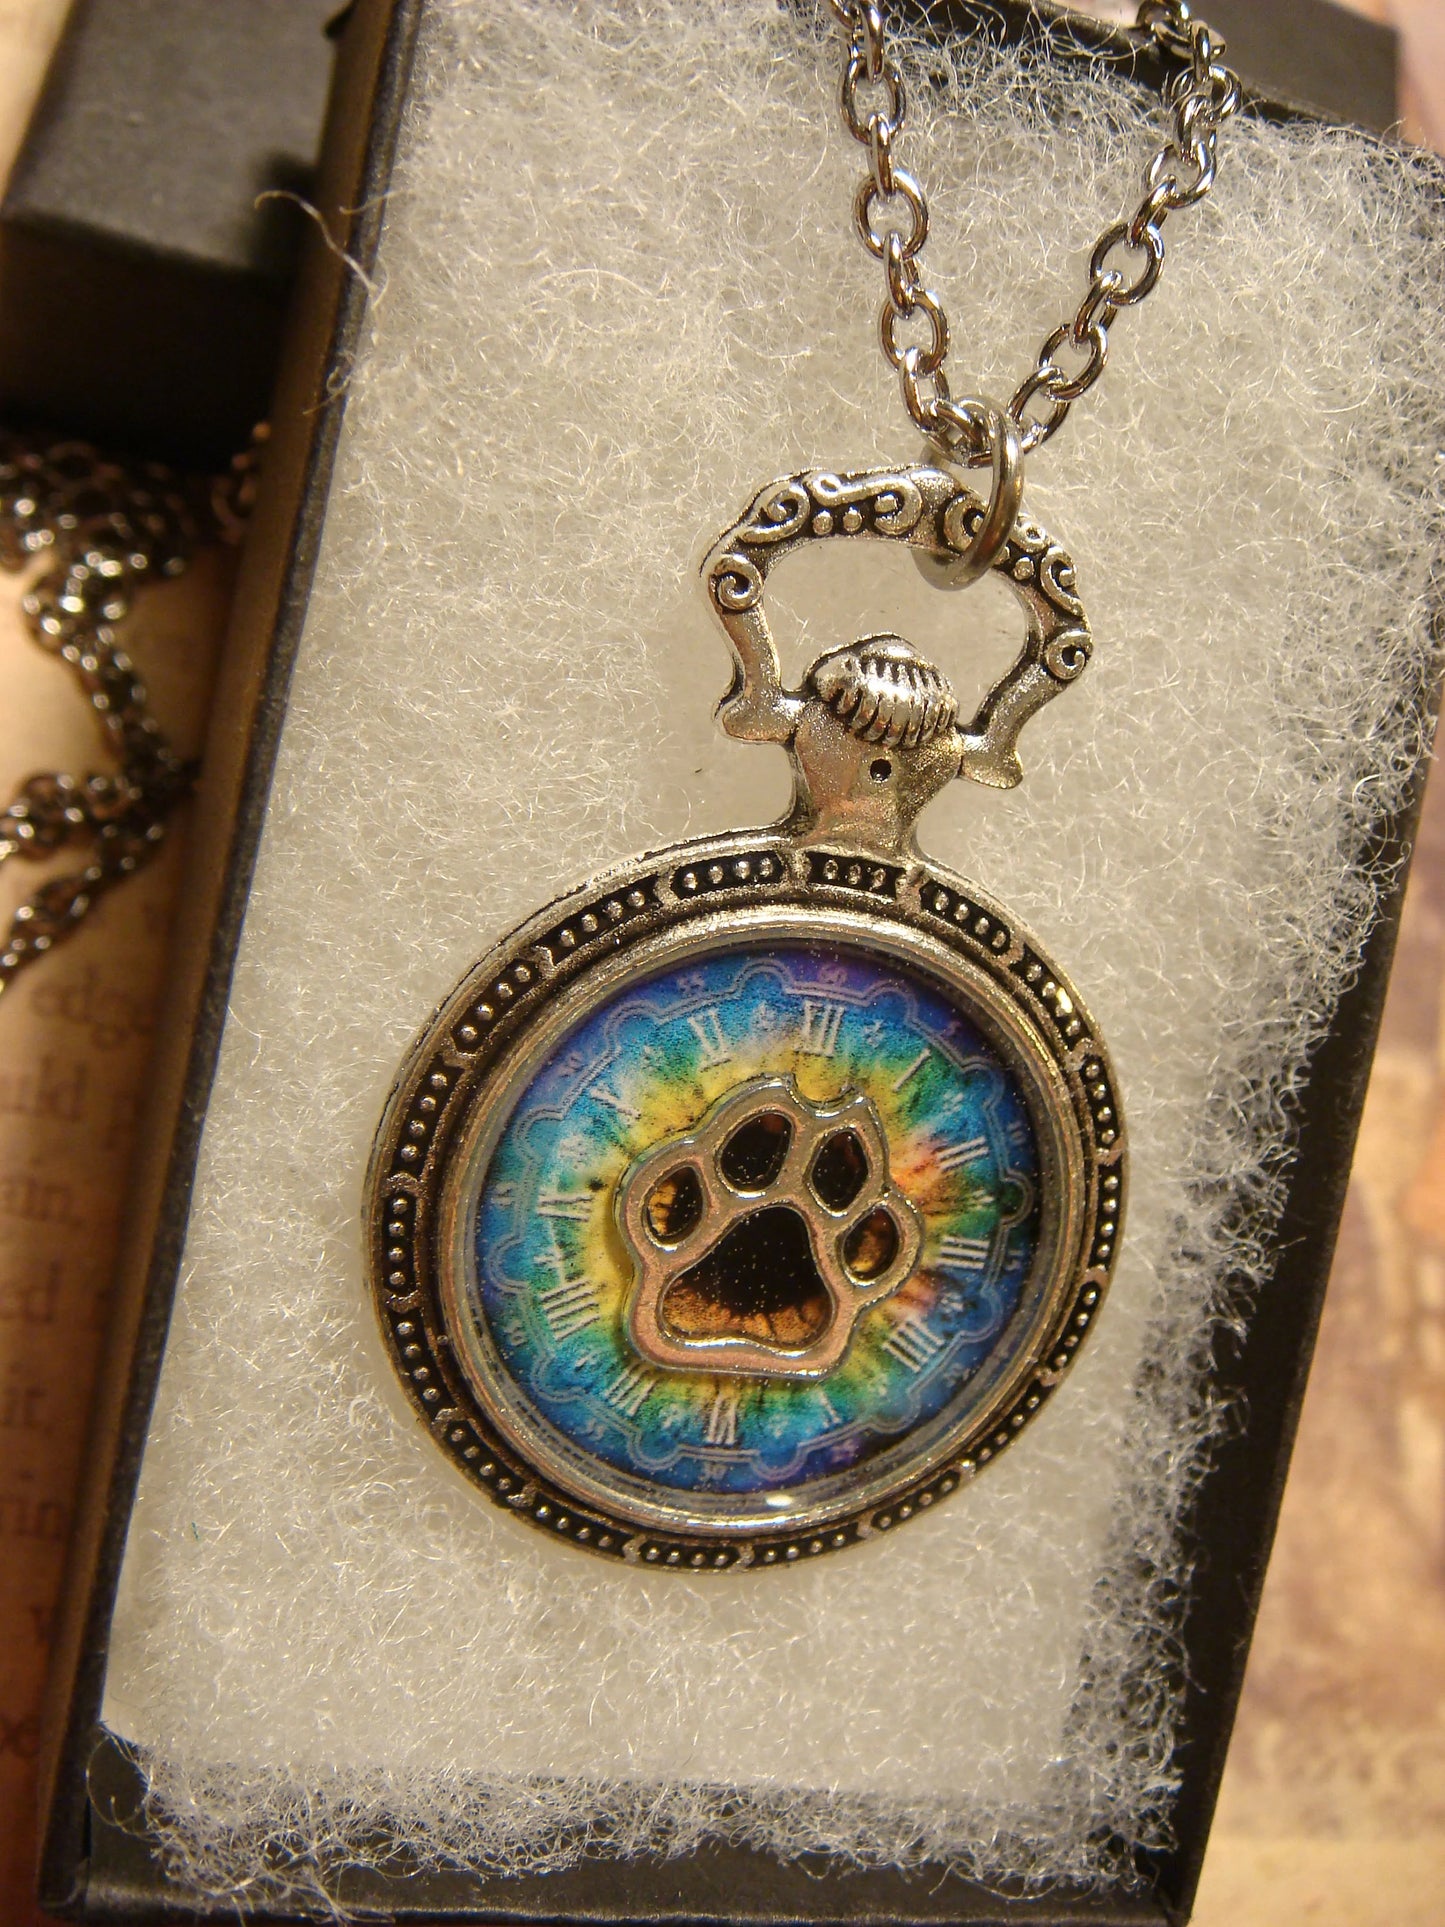 Paw over Colorful Clock Pocket Watch Pendant Necklace